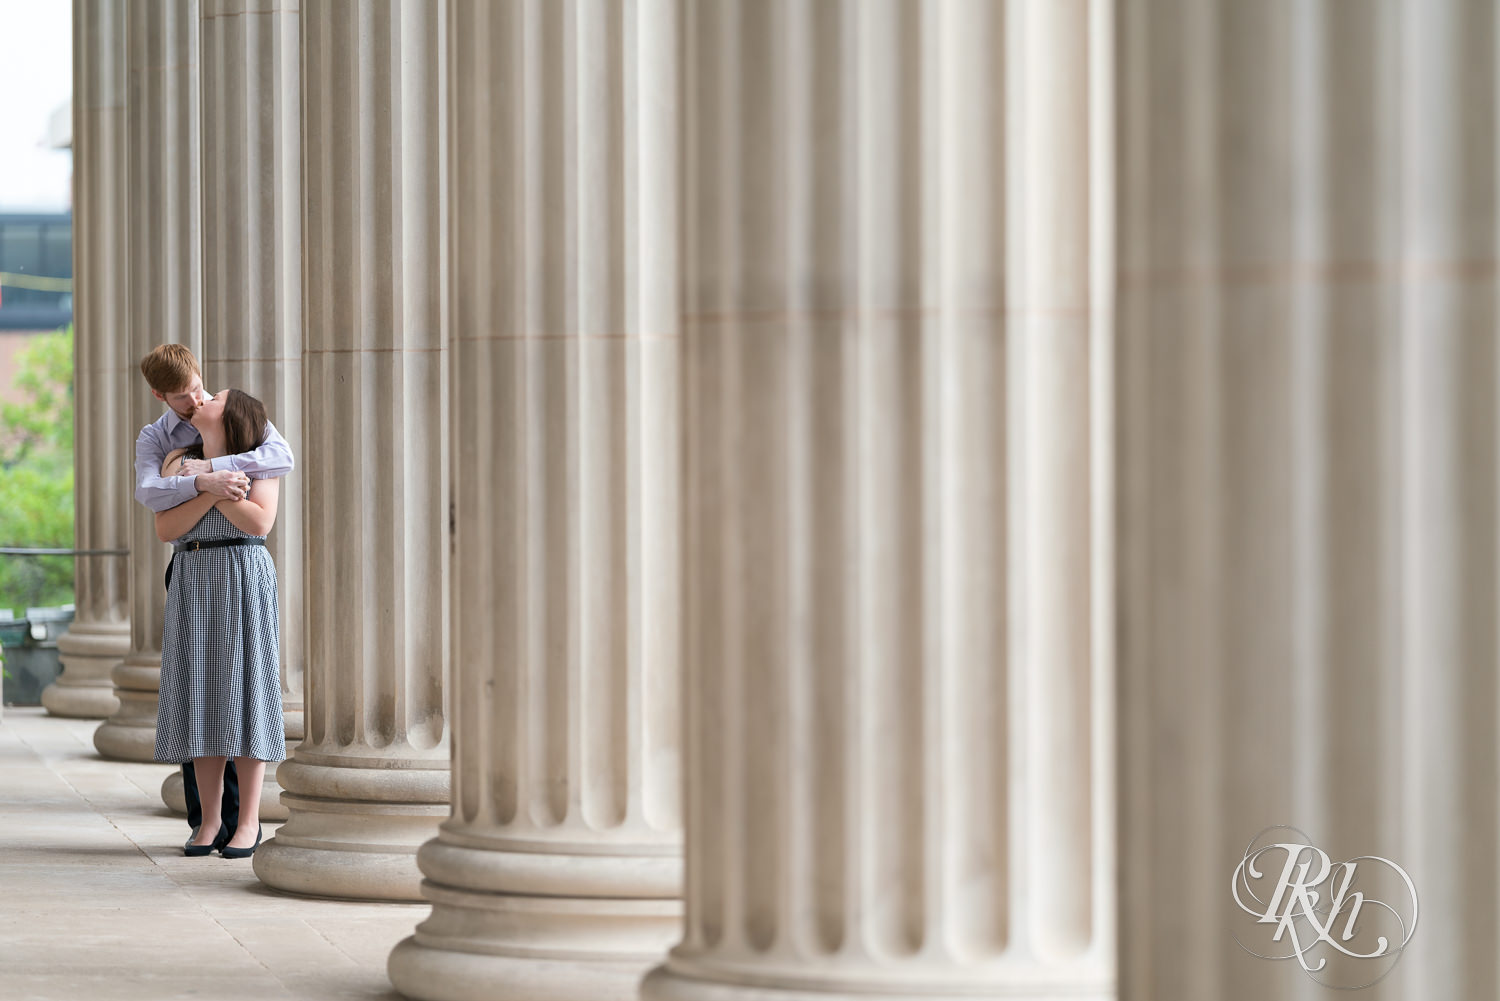 Man and woman kissing between columns during engagement session at University of Minnesota.